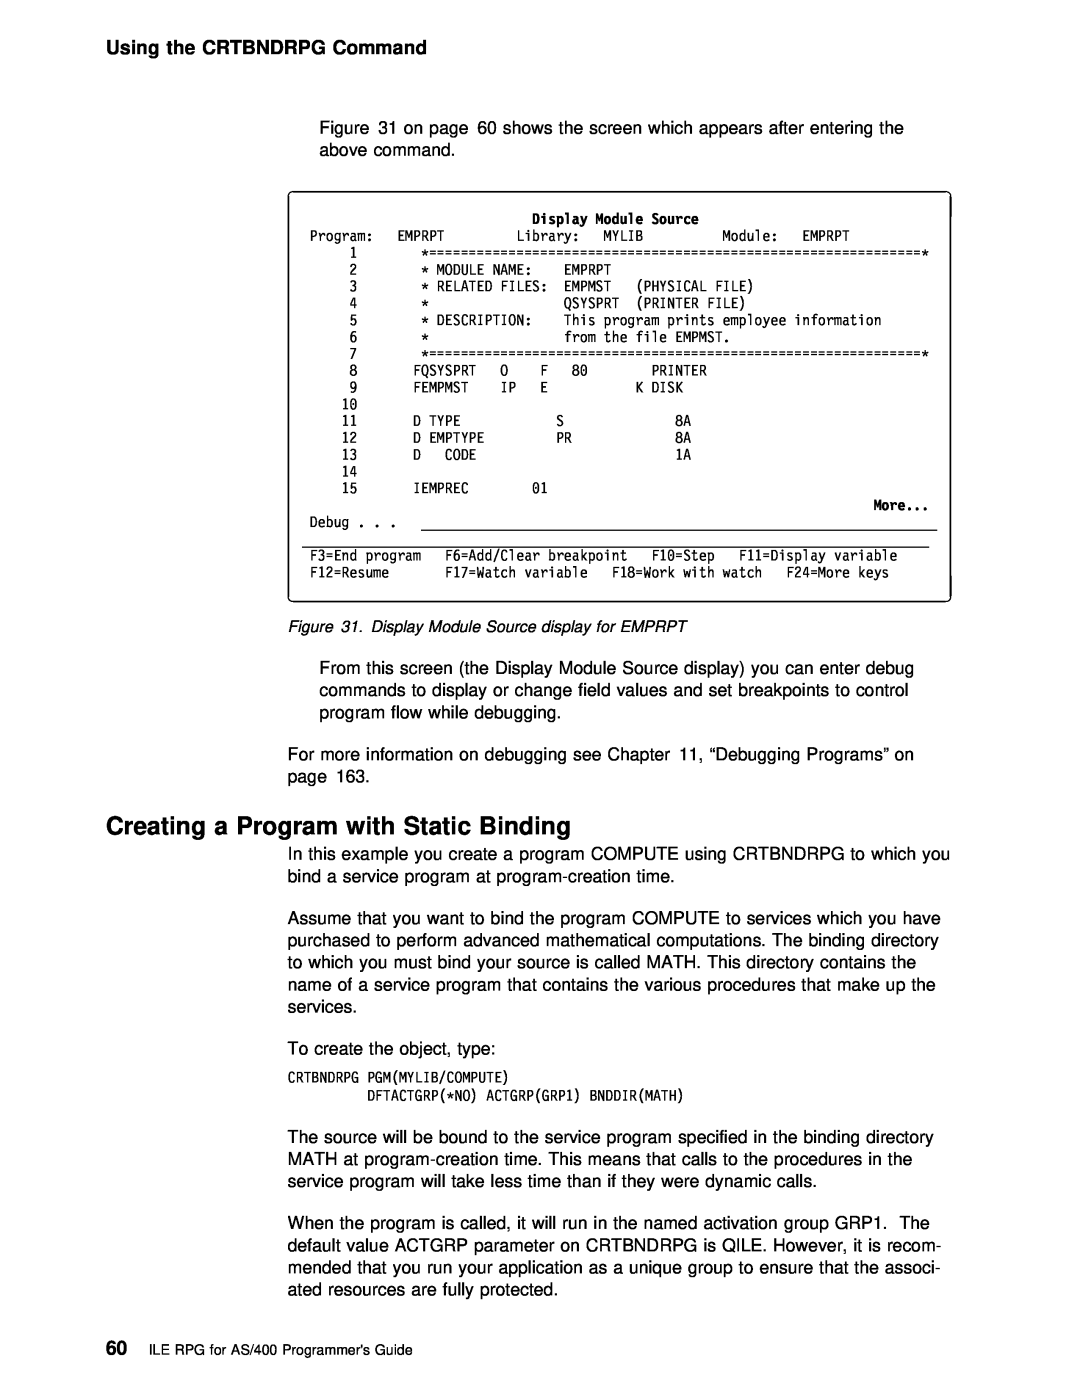 IBM AS/400 manual Binding, Creating a Program with Static, Using the CRTBNDRPG Command 